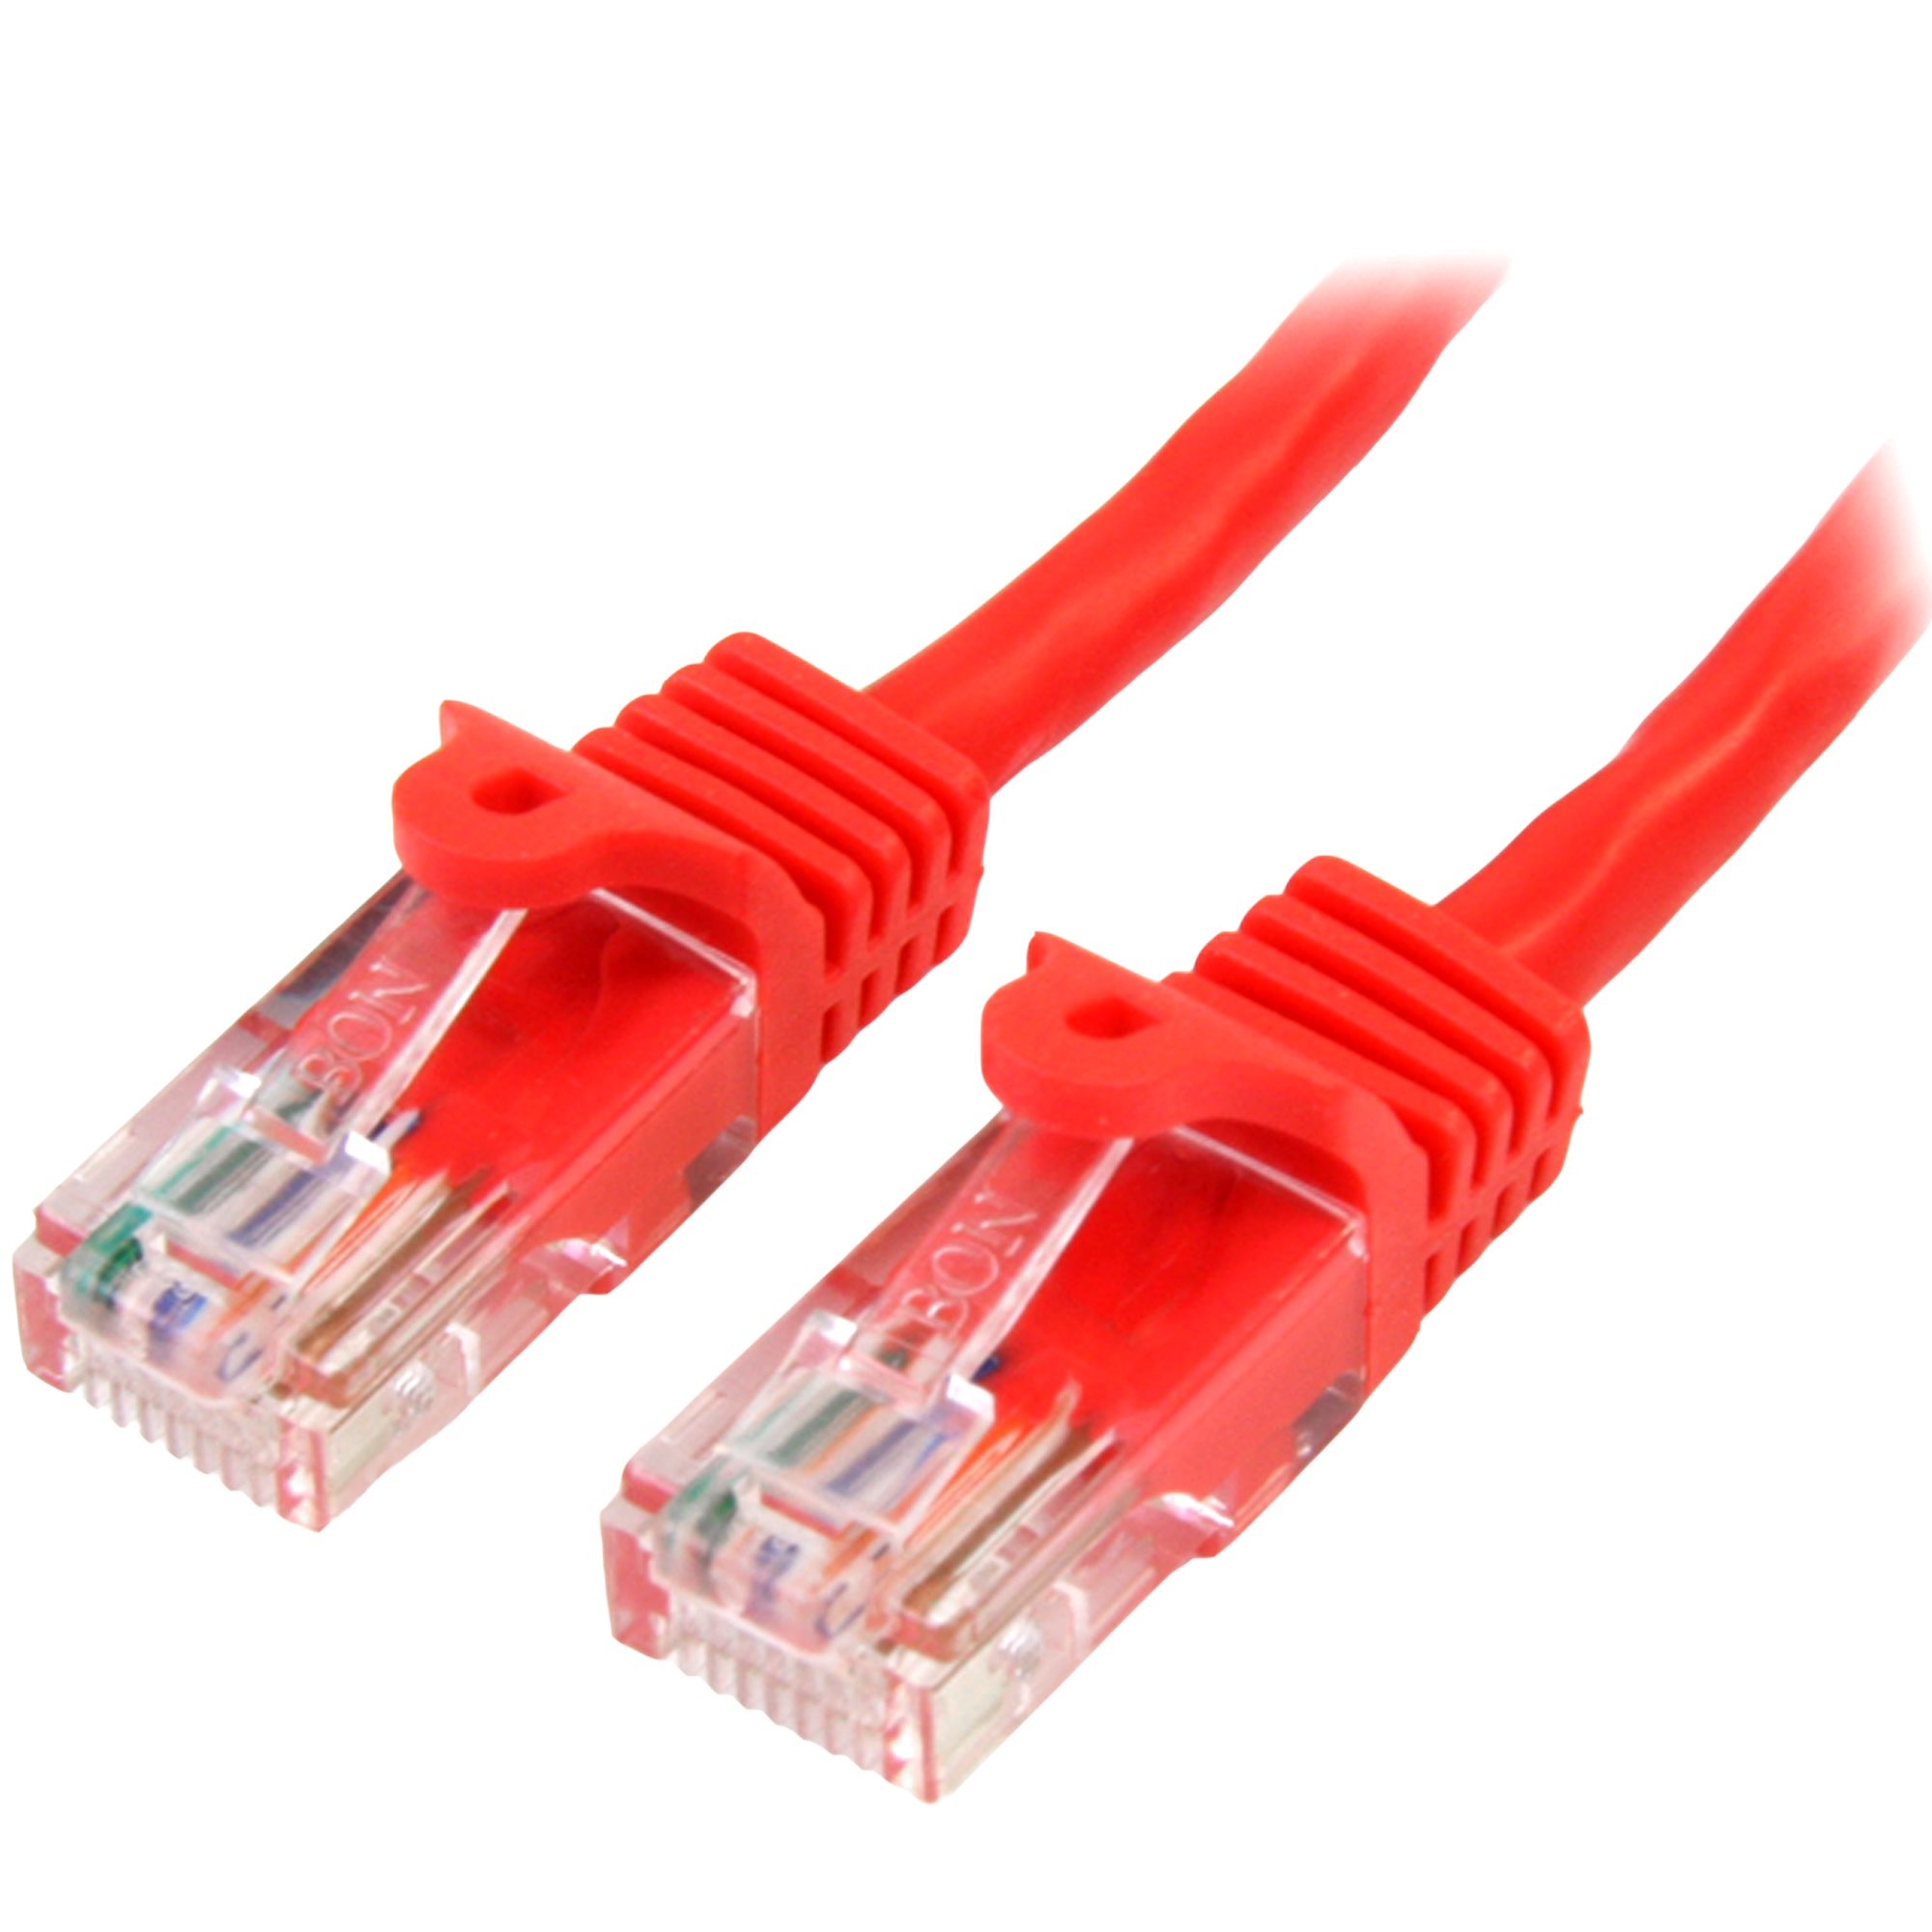 0.5m Red Snagless Cat5e Patch Cable thumbnail